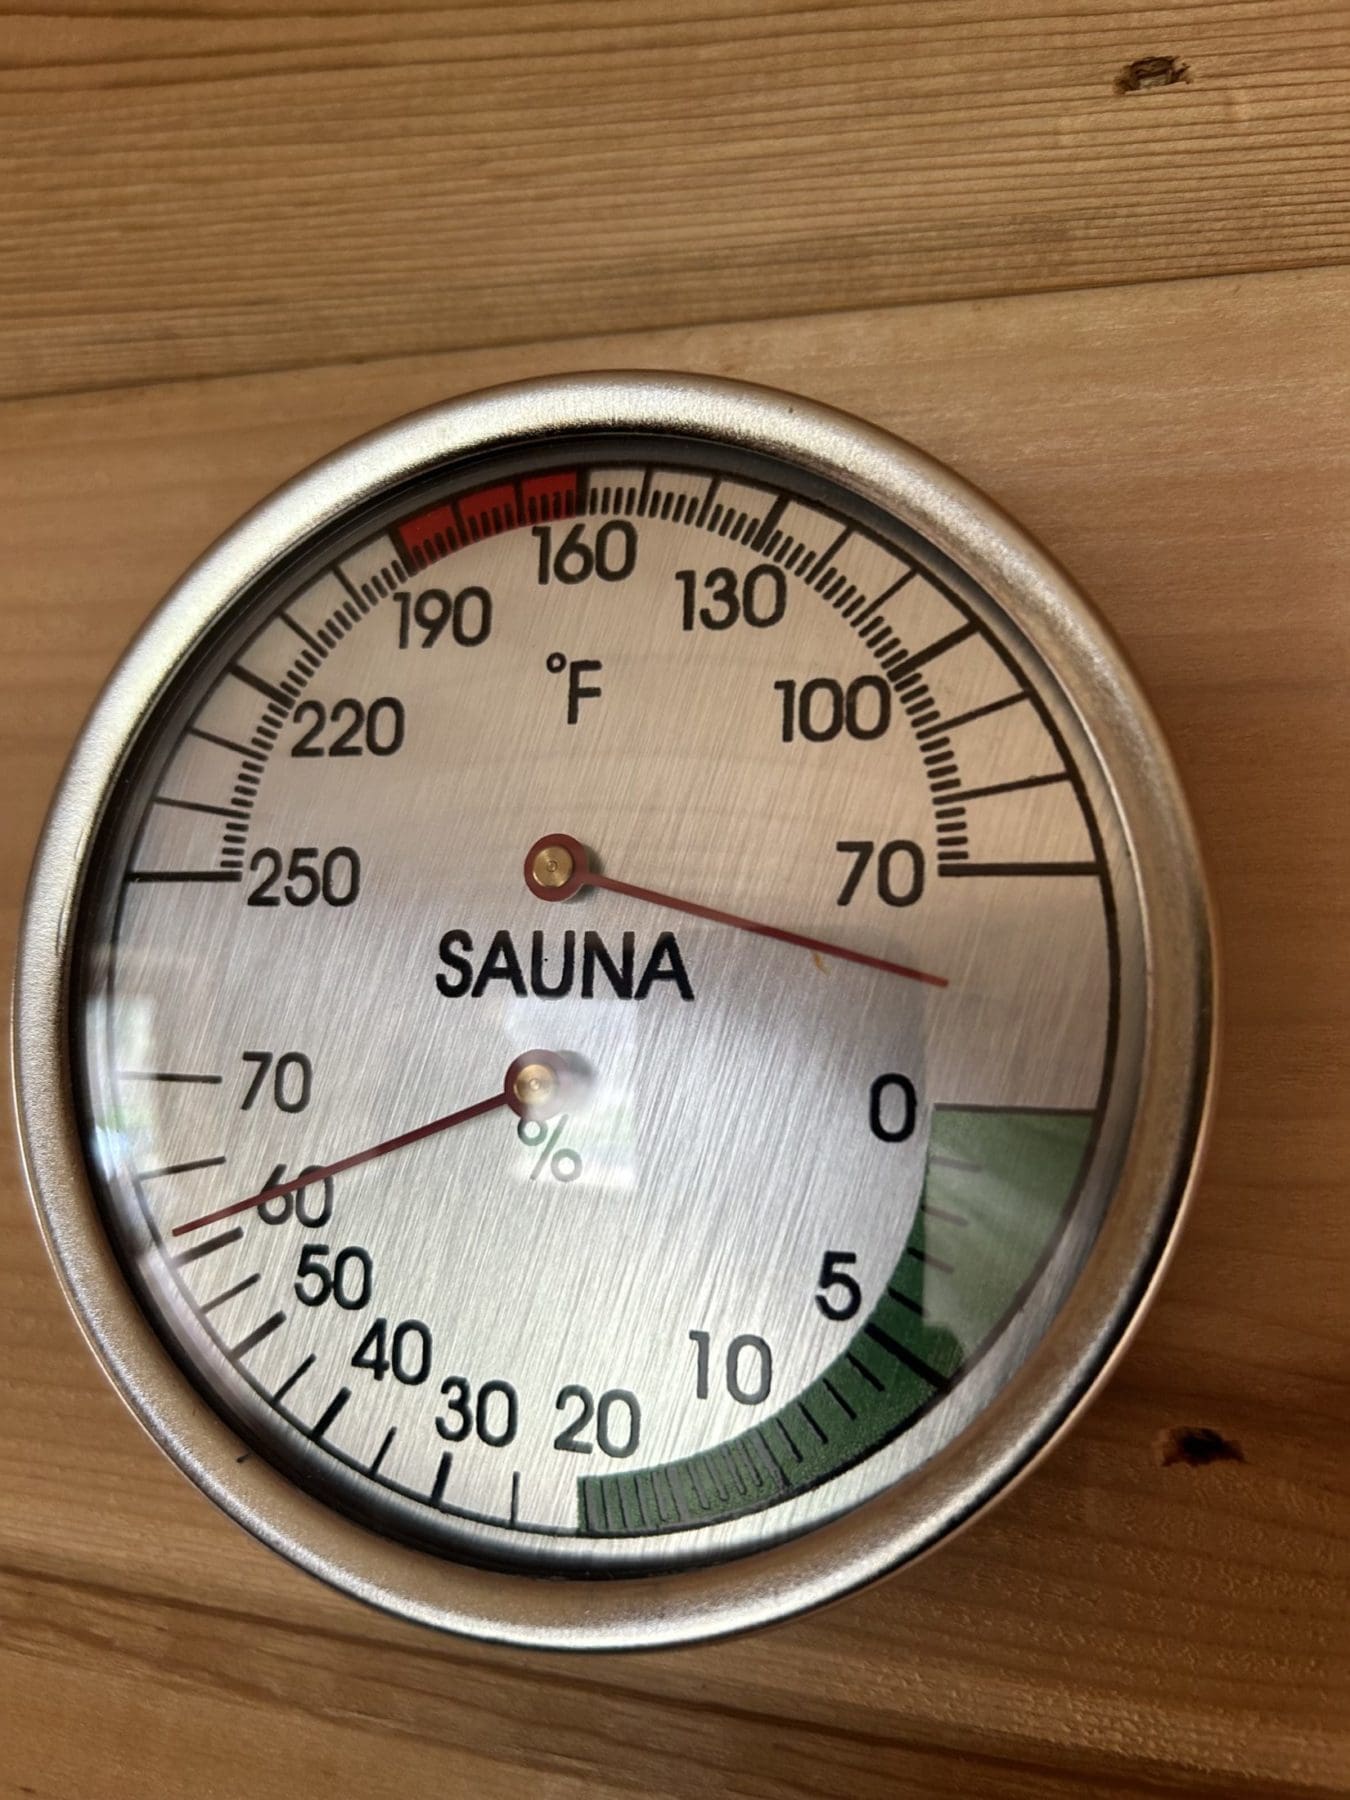 Stainless Steel Thermometer Hygrometer for Sauna Room Temperature